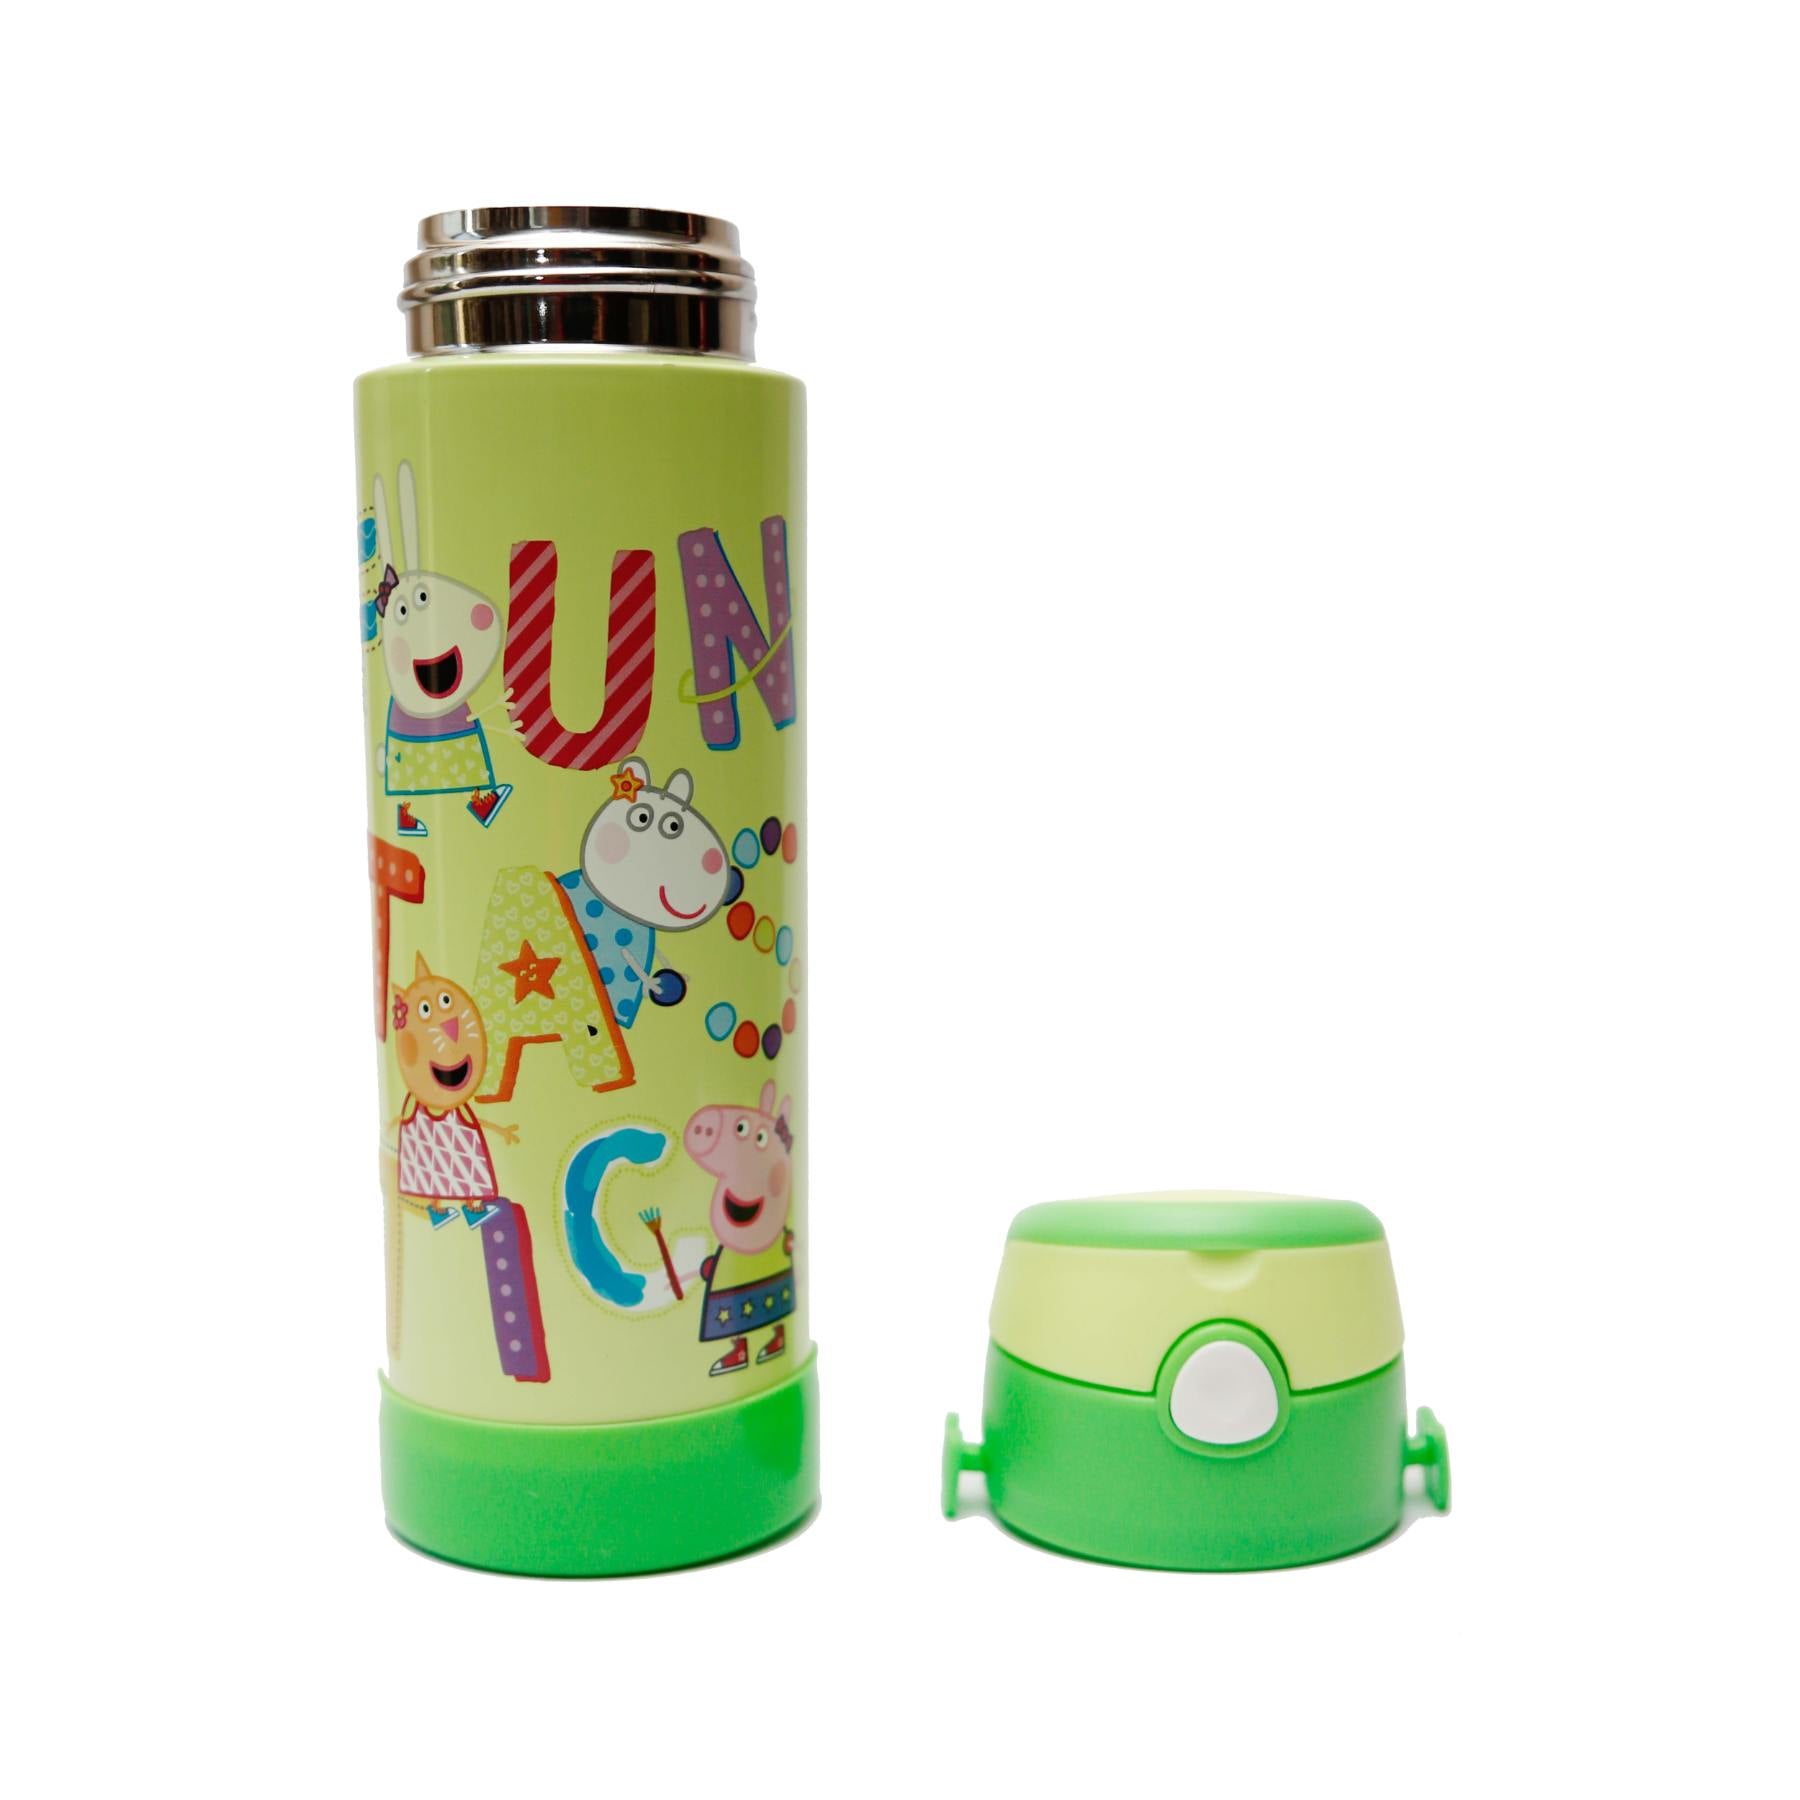 Youp Stainless Steel Insulated Green Color Peppa Pig Kids Sipper Bottle Lucas - 500 Ml